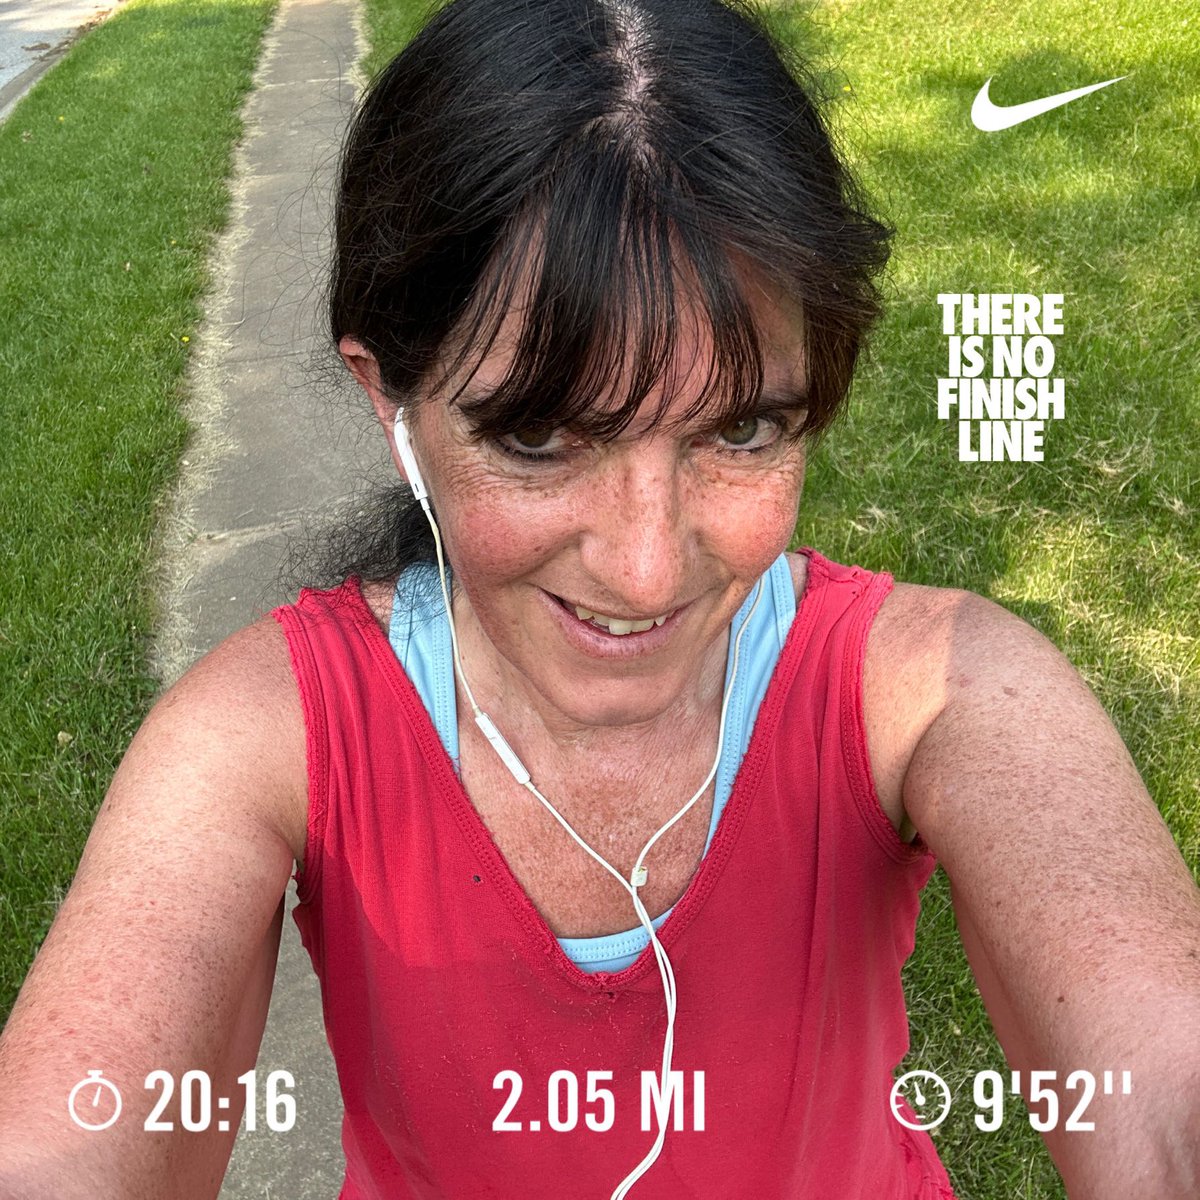 Managed a short after school outside run.  Exhausterwhelmulated for sure!  #justdoit #EveryRunCounts 🏃🏻‍♀️🏃🏻‍♀️